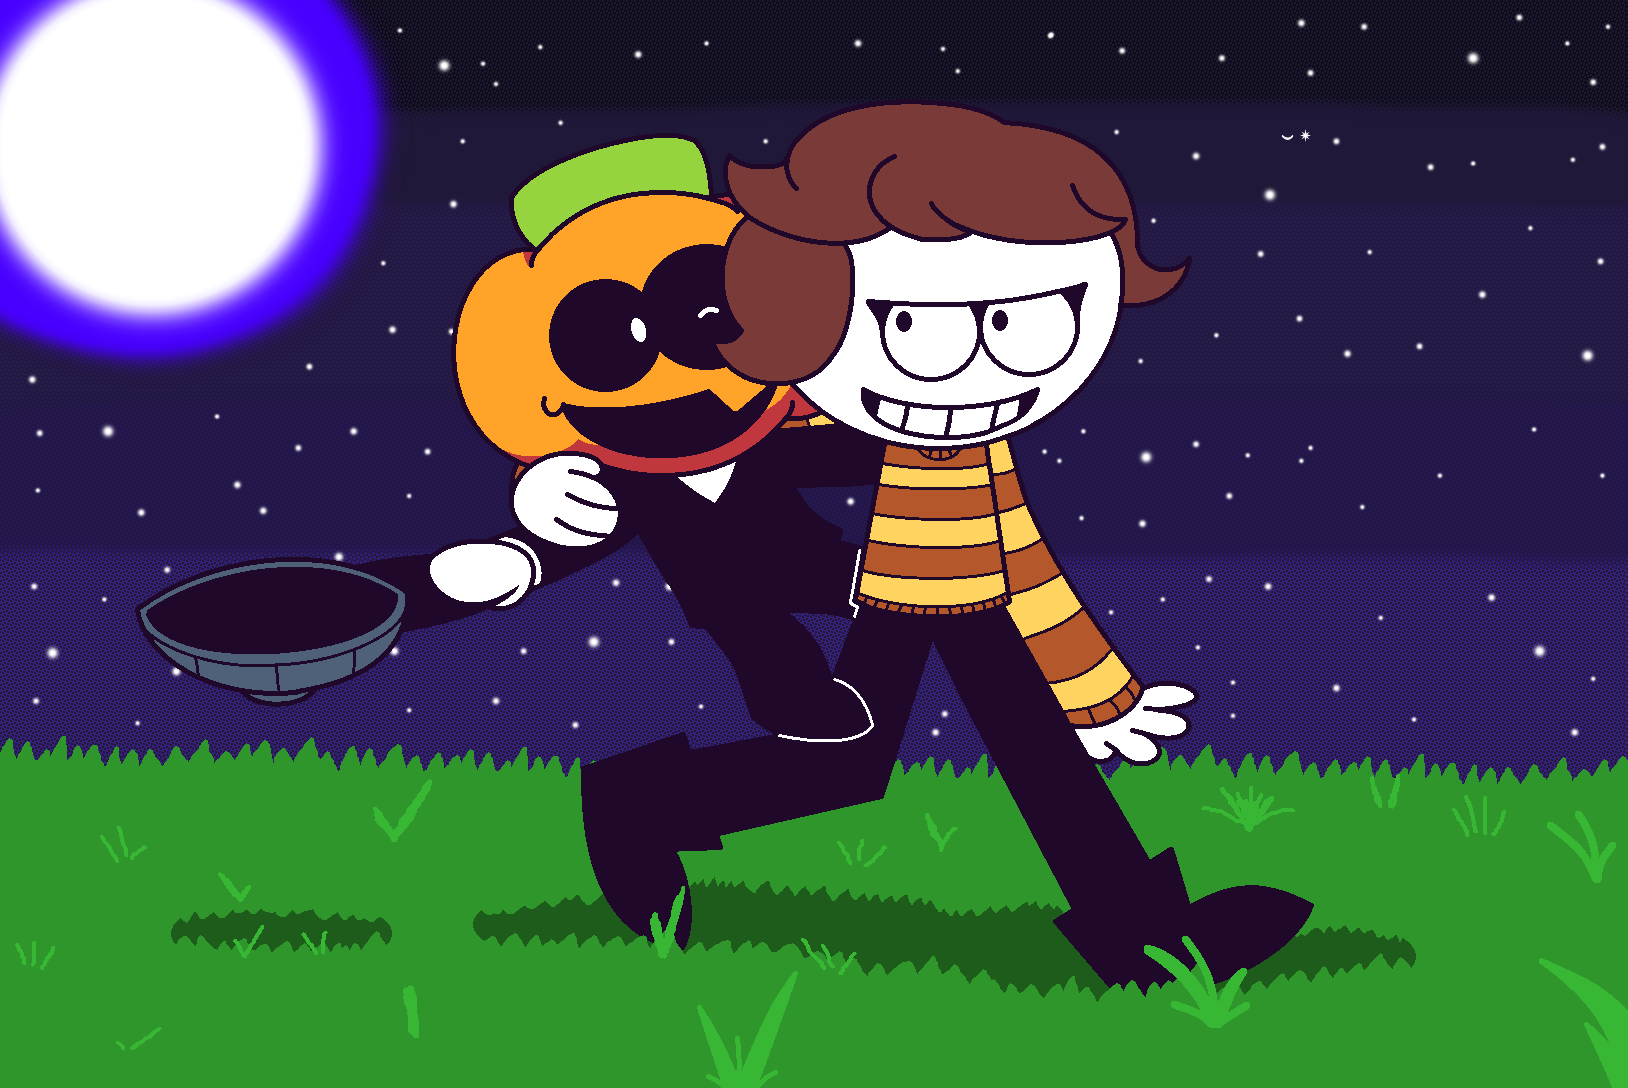 Roy Spooky Month I Love You GIF